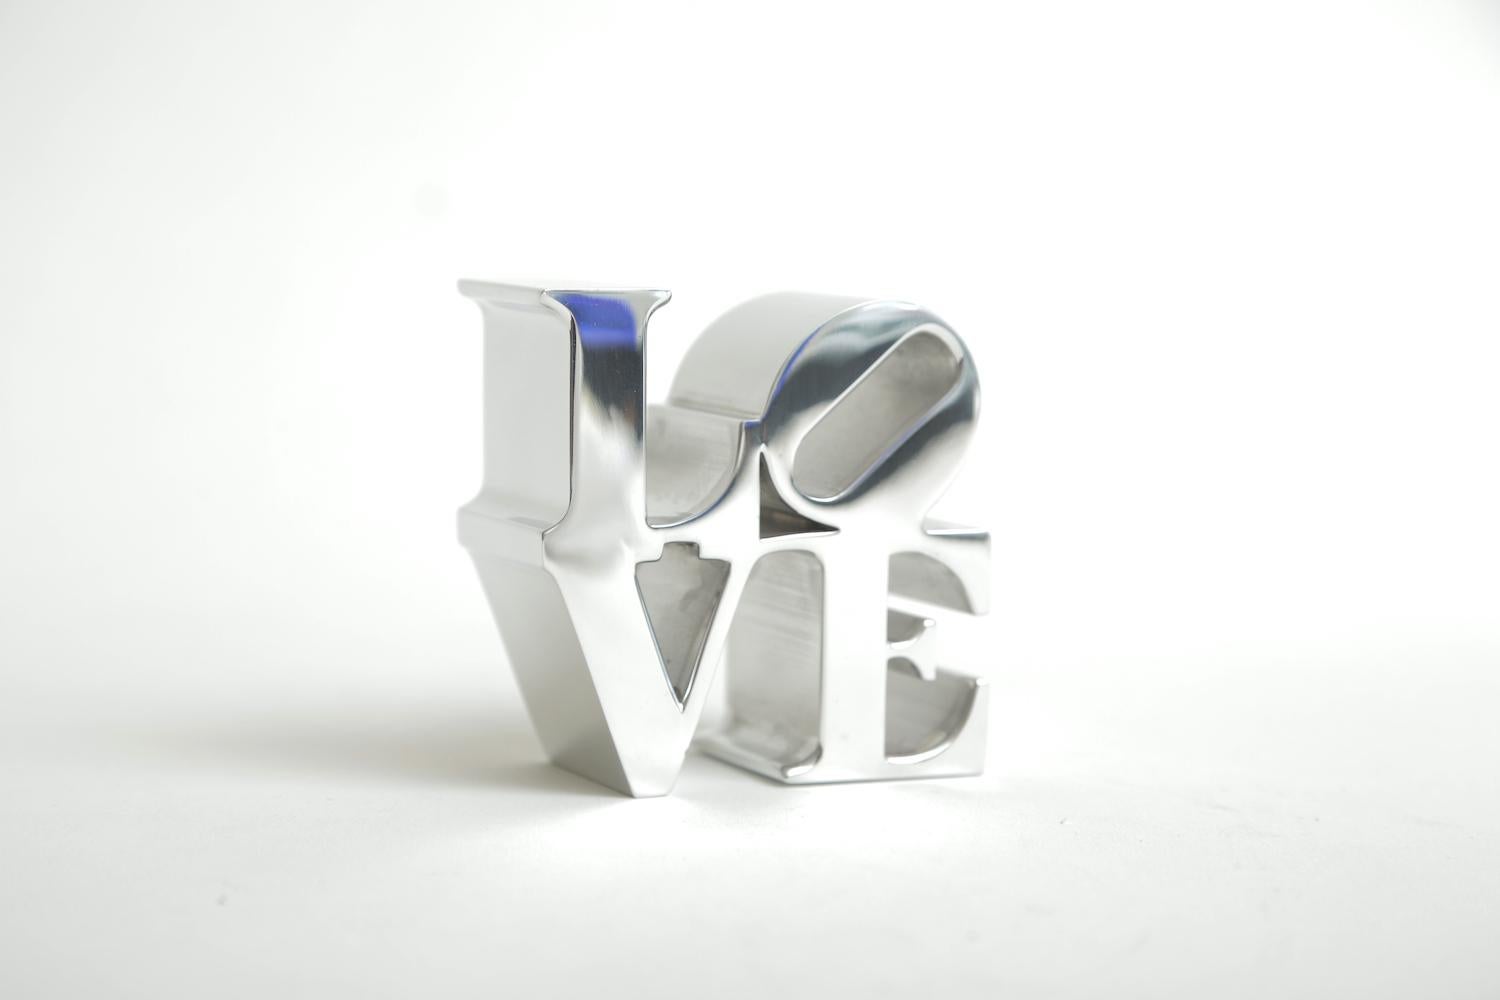 This authentic Robert Indiana chrome LOVE paperweight sculpture is vintage from the 1970s. This will make a great desk accessory. These were at one time sold in museum stores at that time such as MOMA and various other high end museum shops and